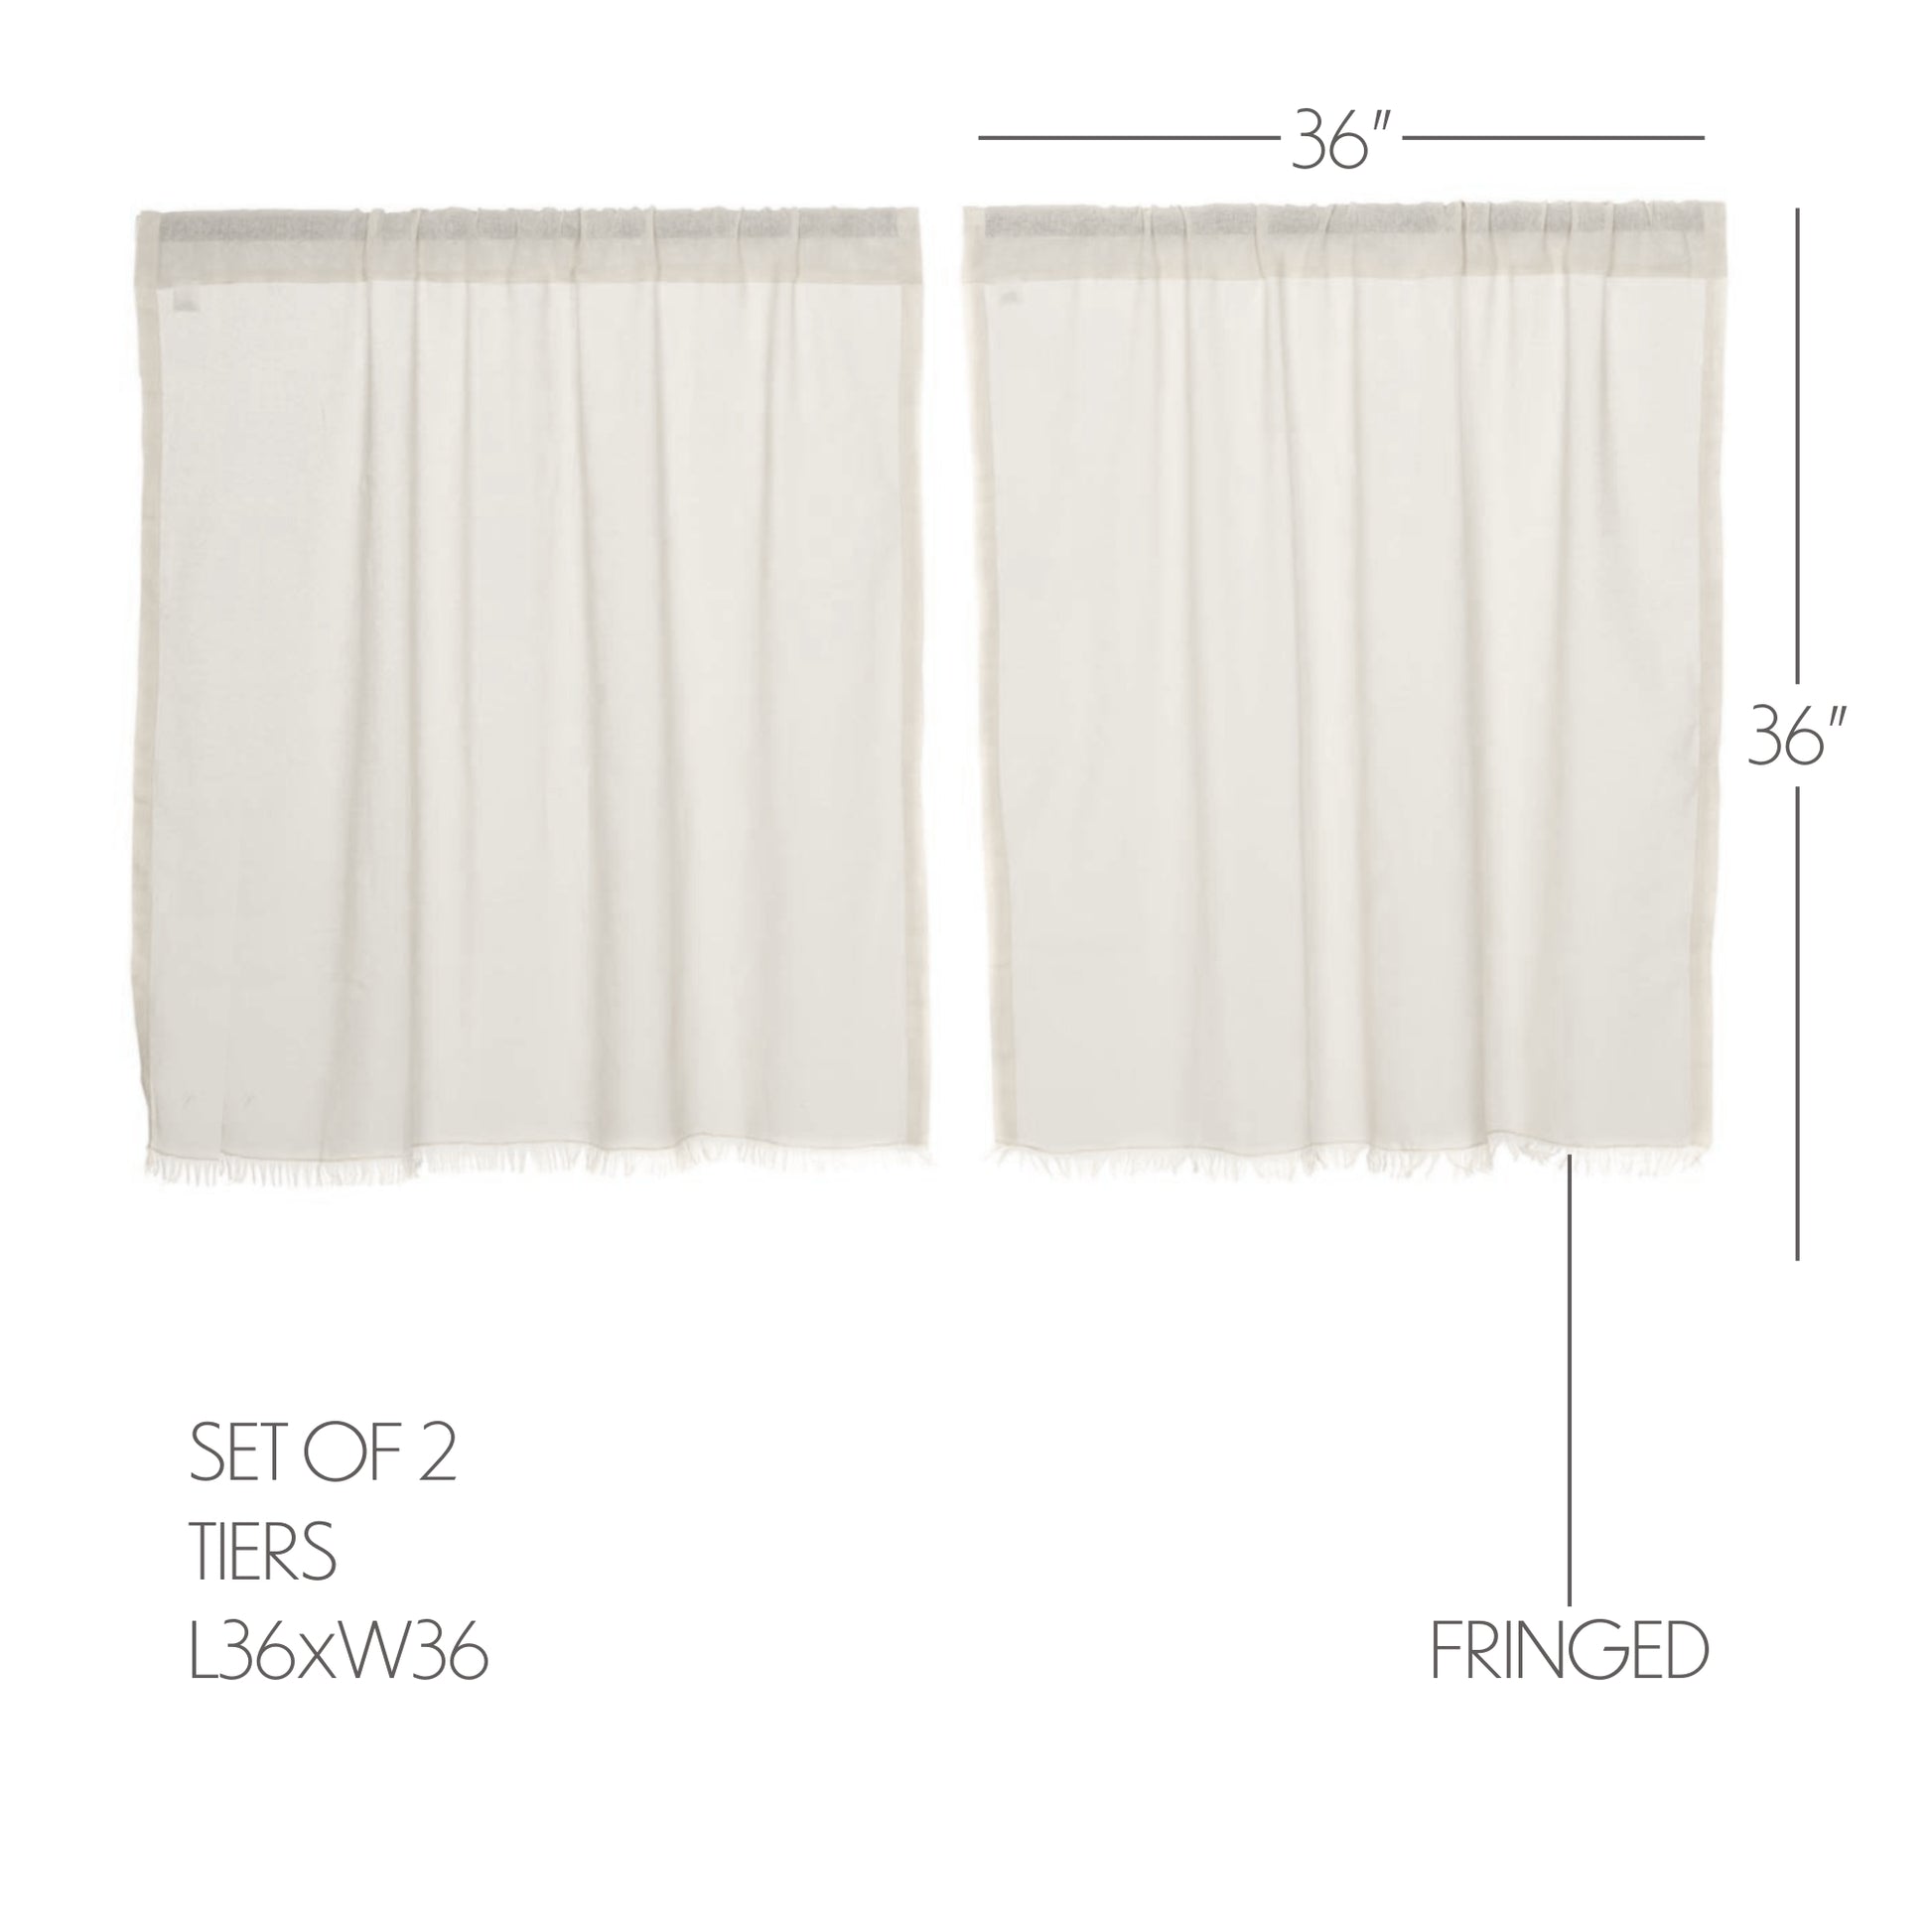 10763-Tobacco-Cloth-Antique-White-Tier-Fringed-Set-of-2-L36xW36-image-1